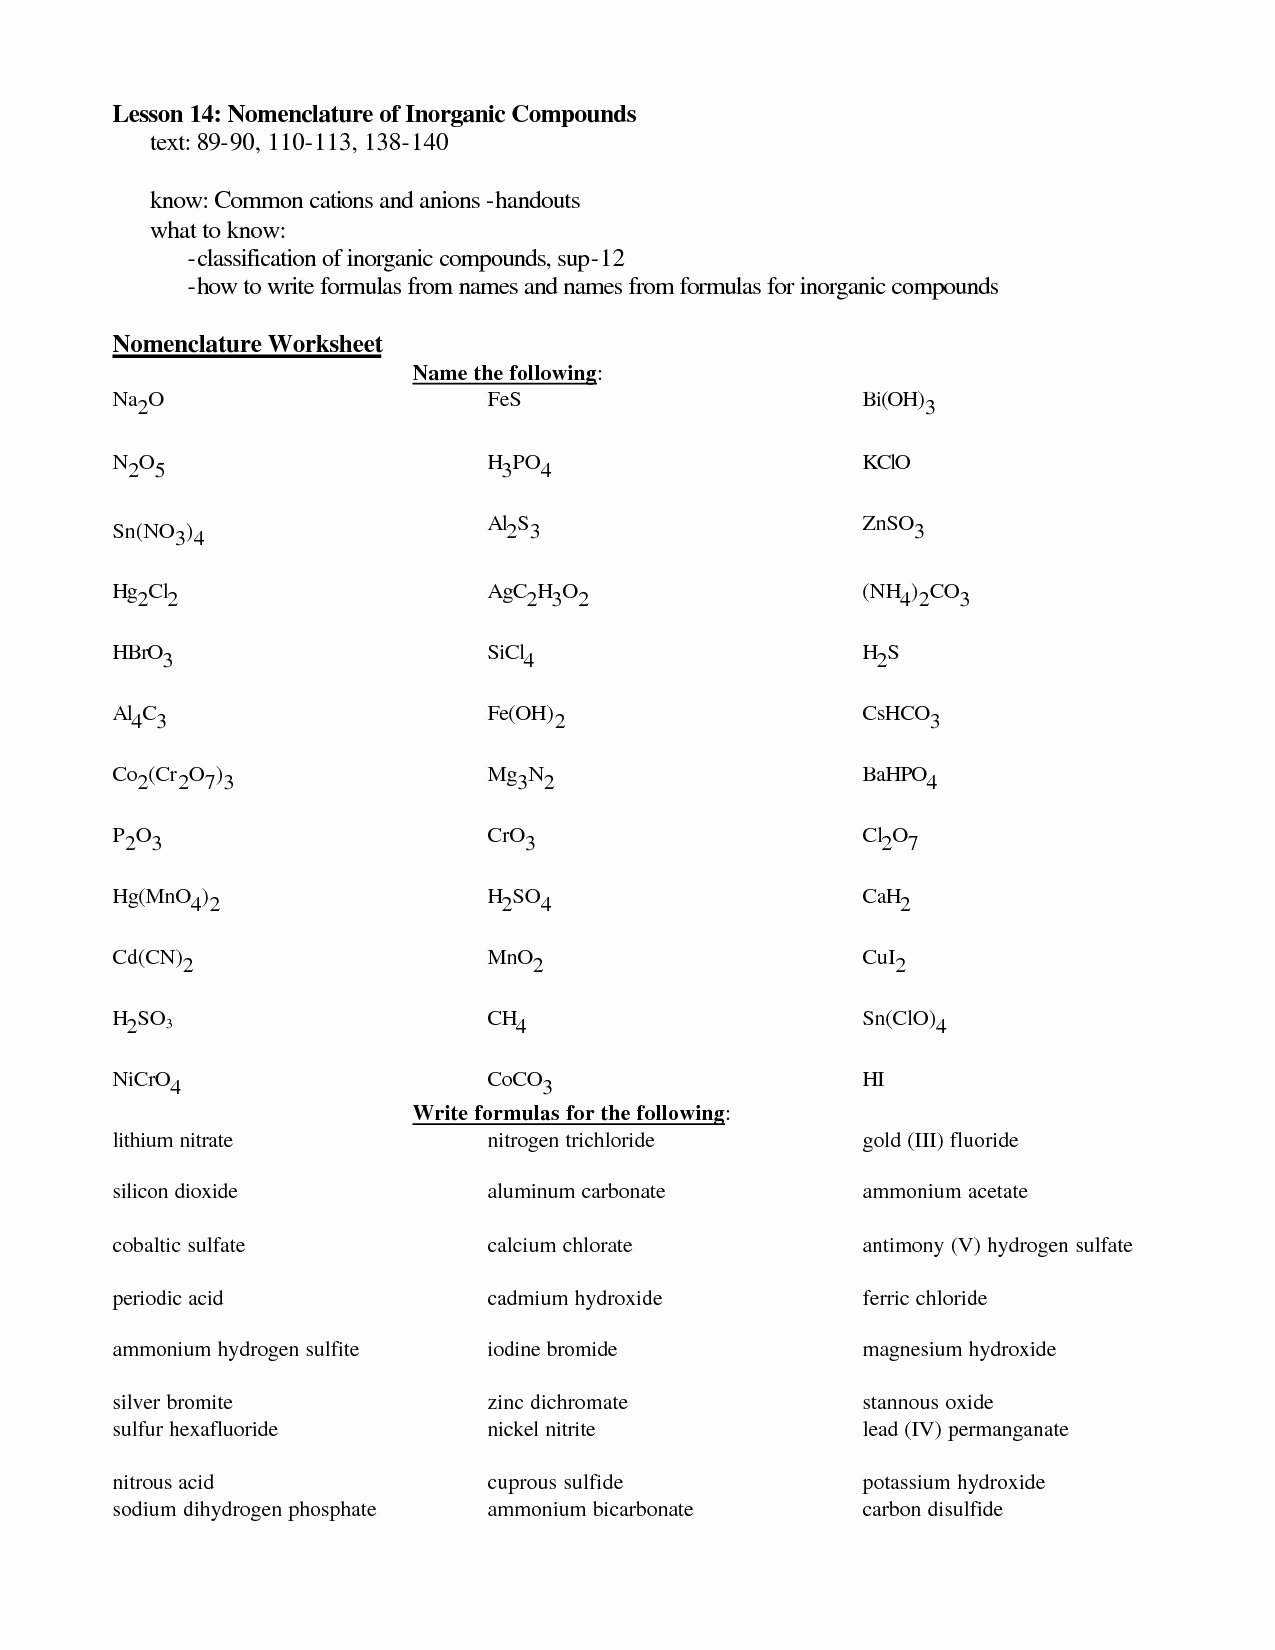 Organic Compounds Worksheet Answers Lovely 17 Best Of Naming organic Pounds Worksheet